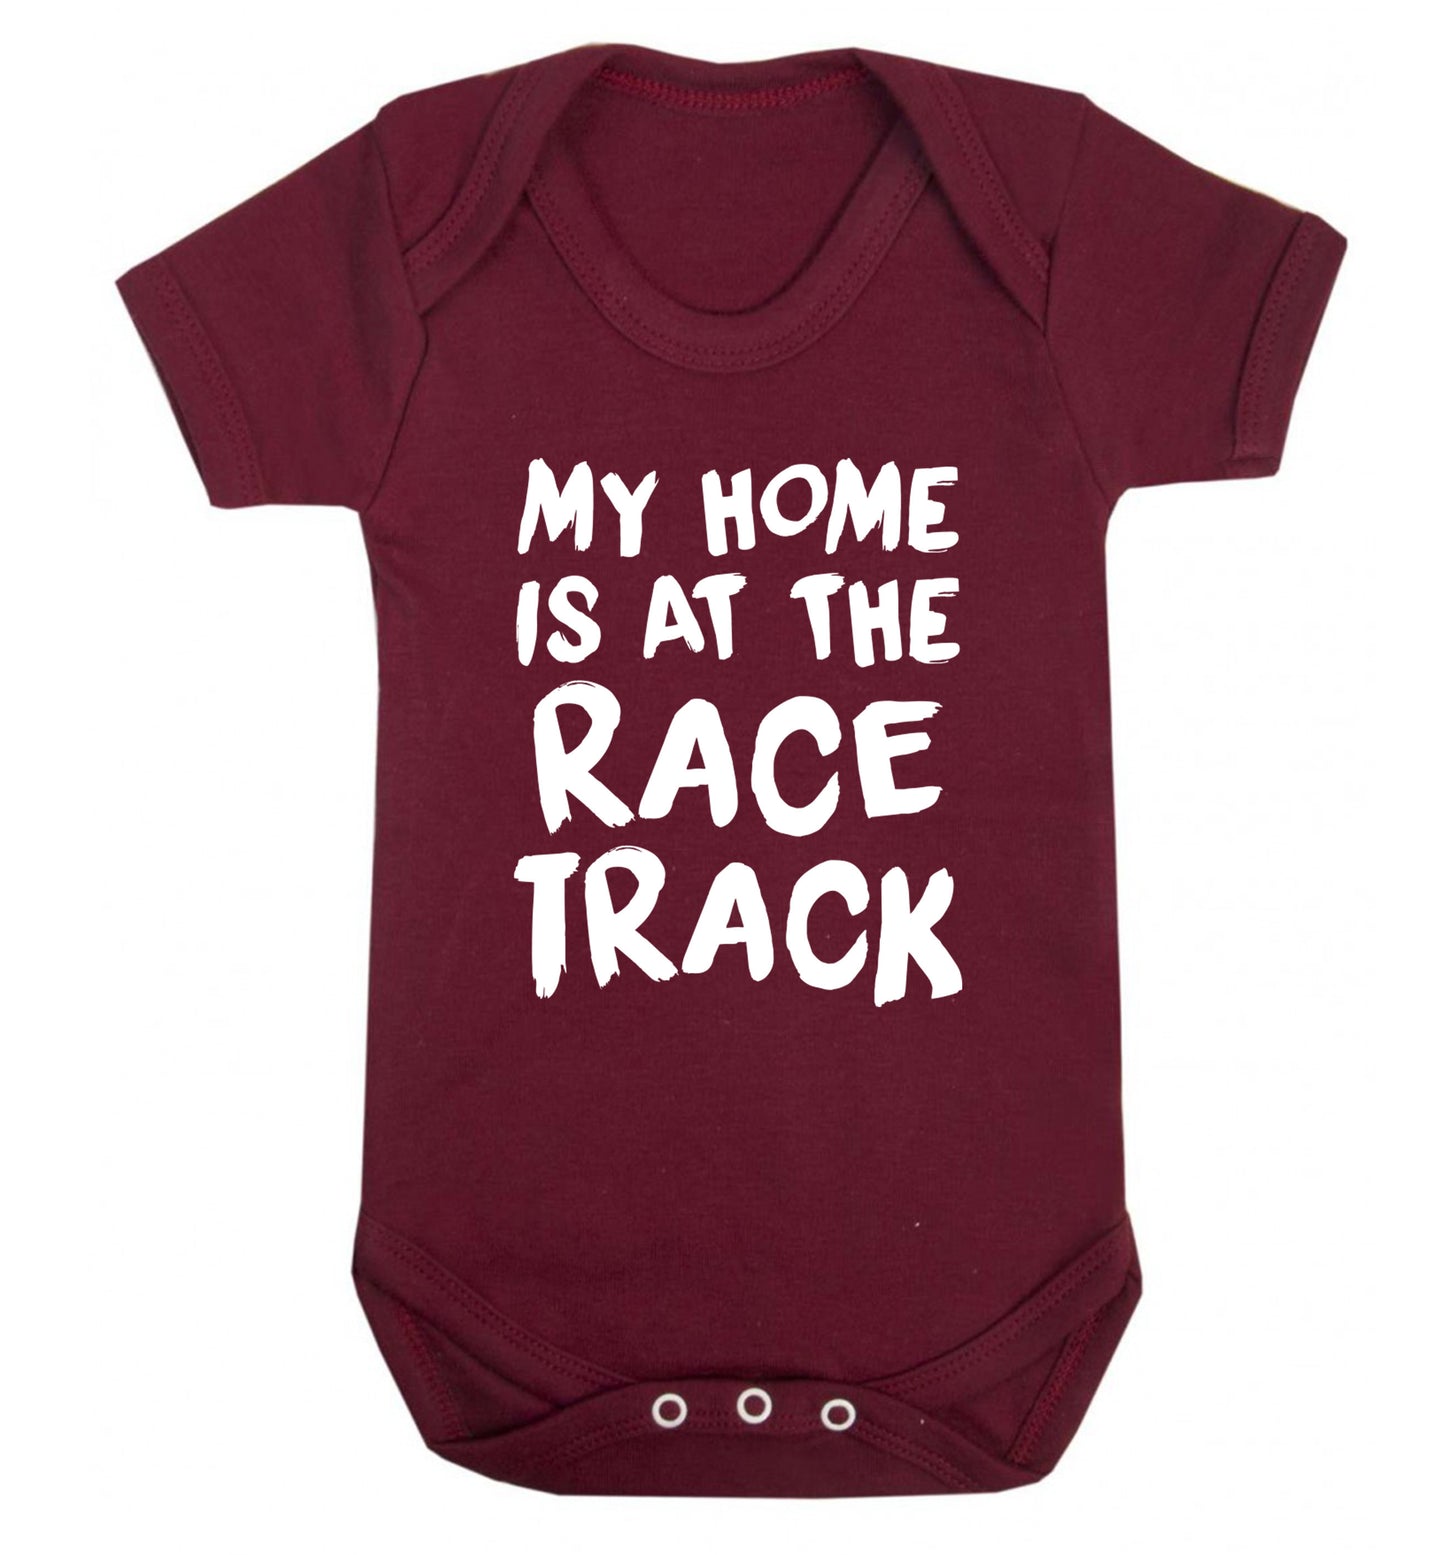 My home is at the race track Baby Vest maroon 18-24 months